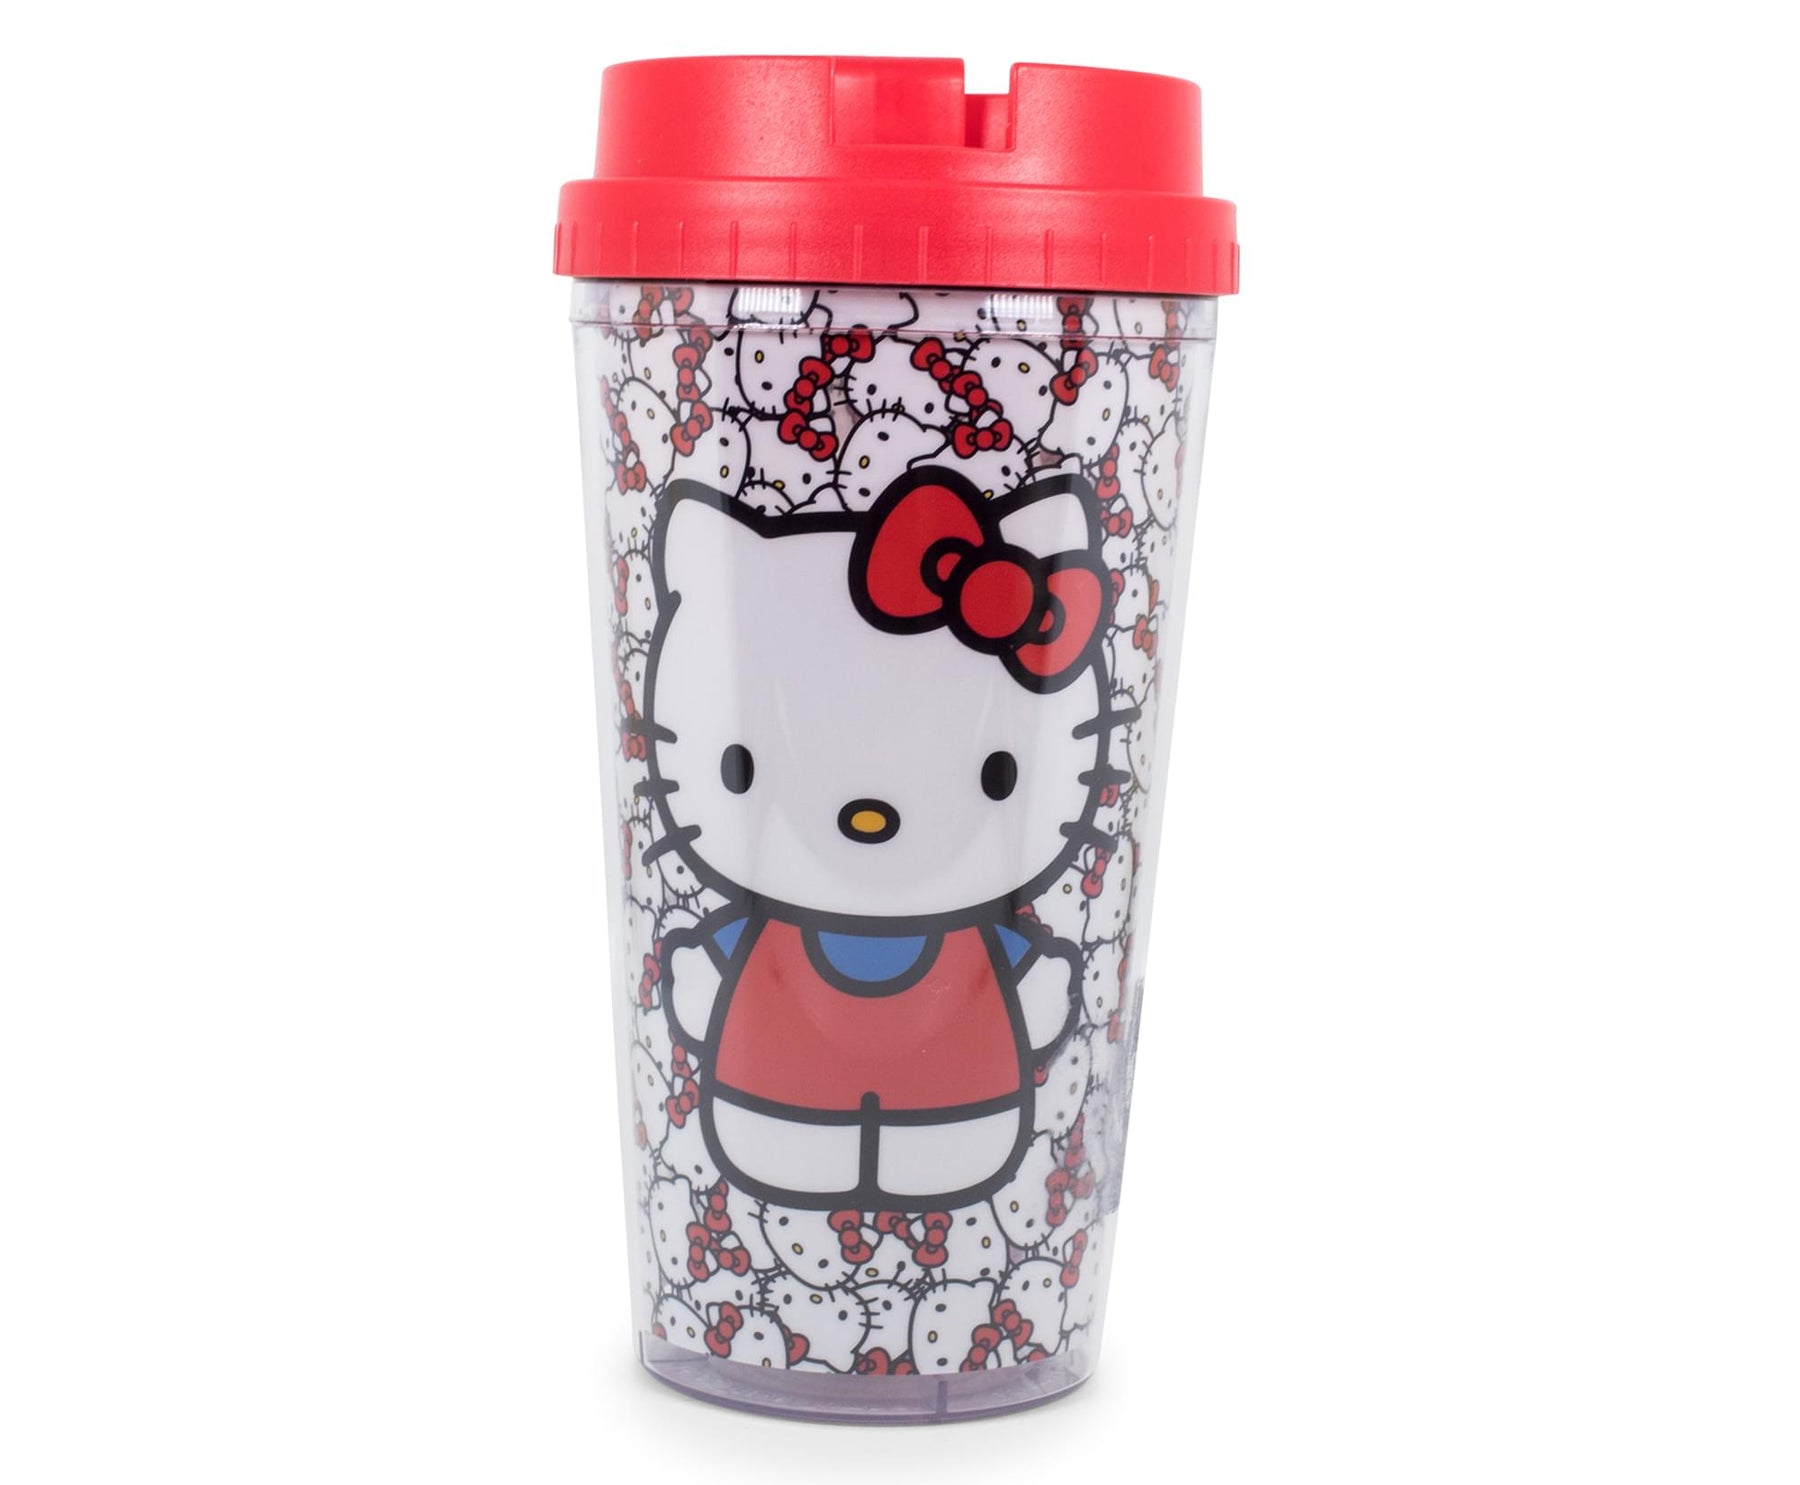 Sanrio Hello Kitty Allover Faces Plastic Travel Mug With Lid | Holds 16 Ounces